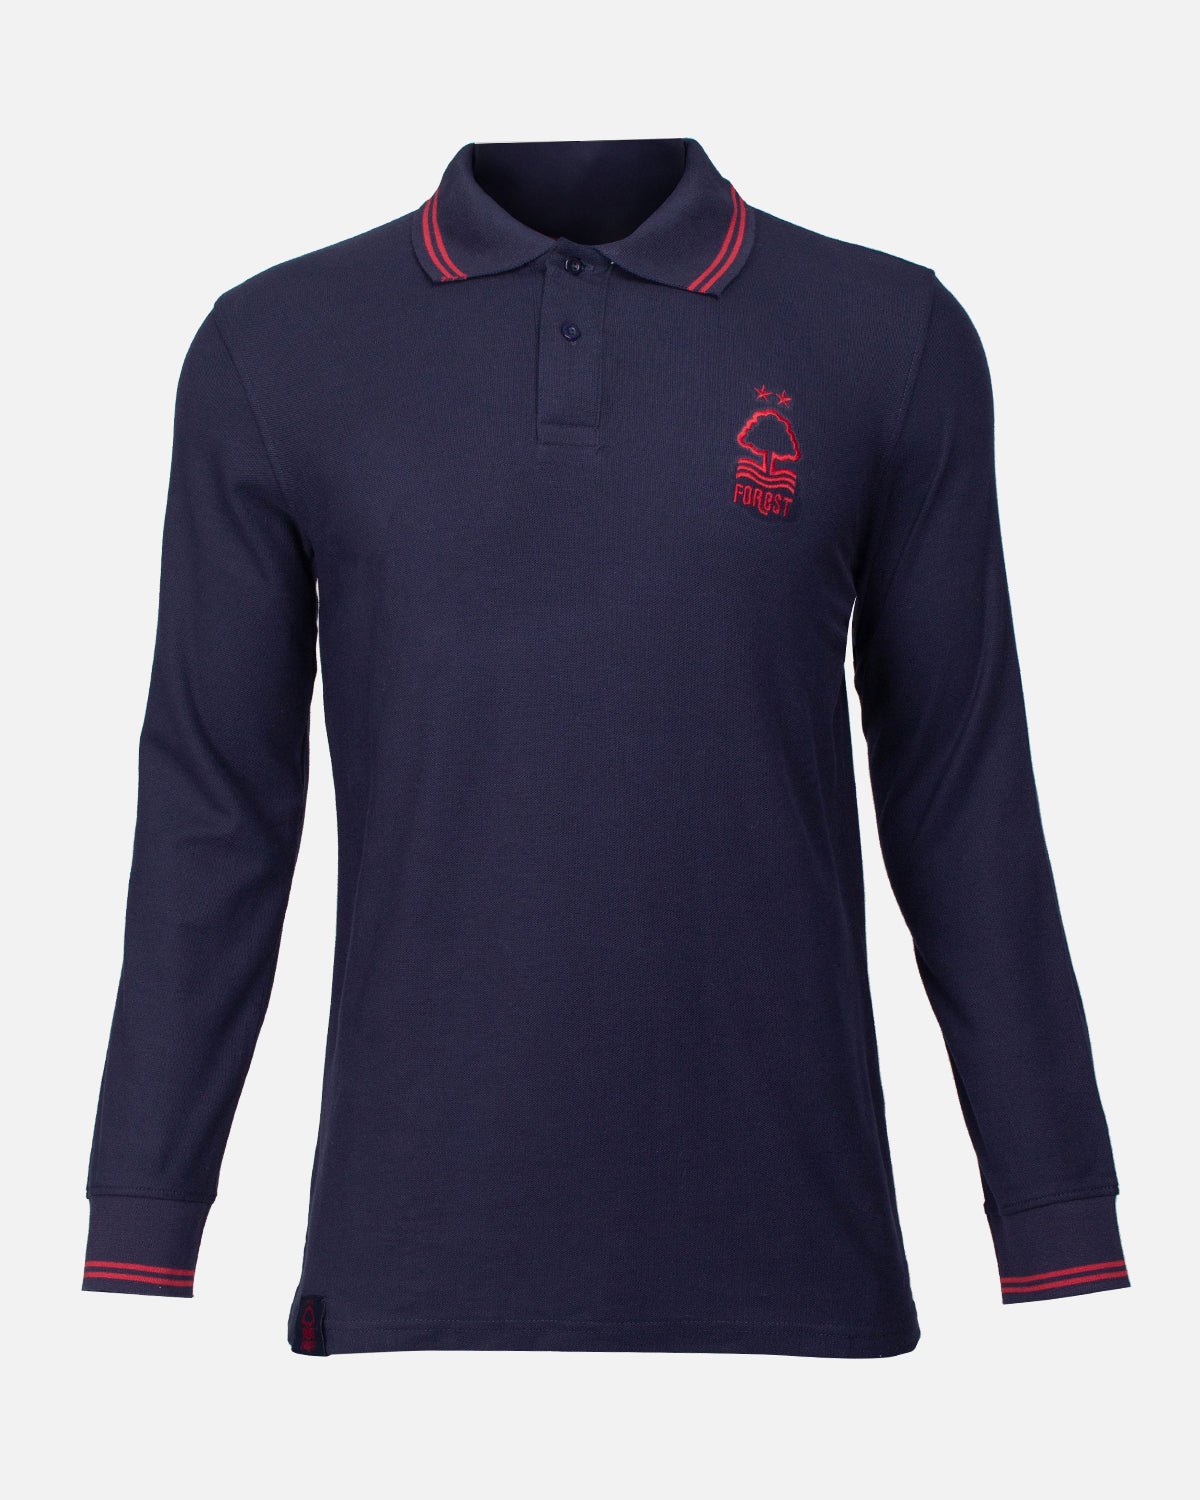 NFFC Junior Navy Essential Long Sleeve Polo - Nottingham Forest FC